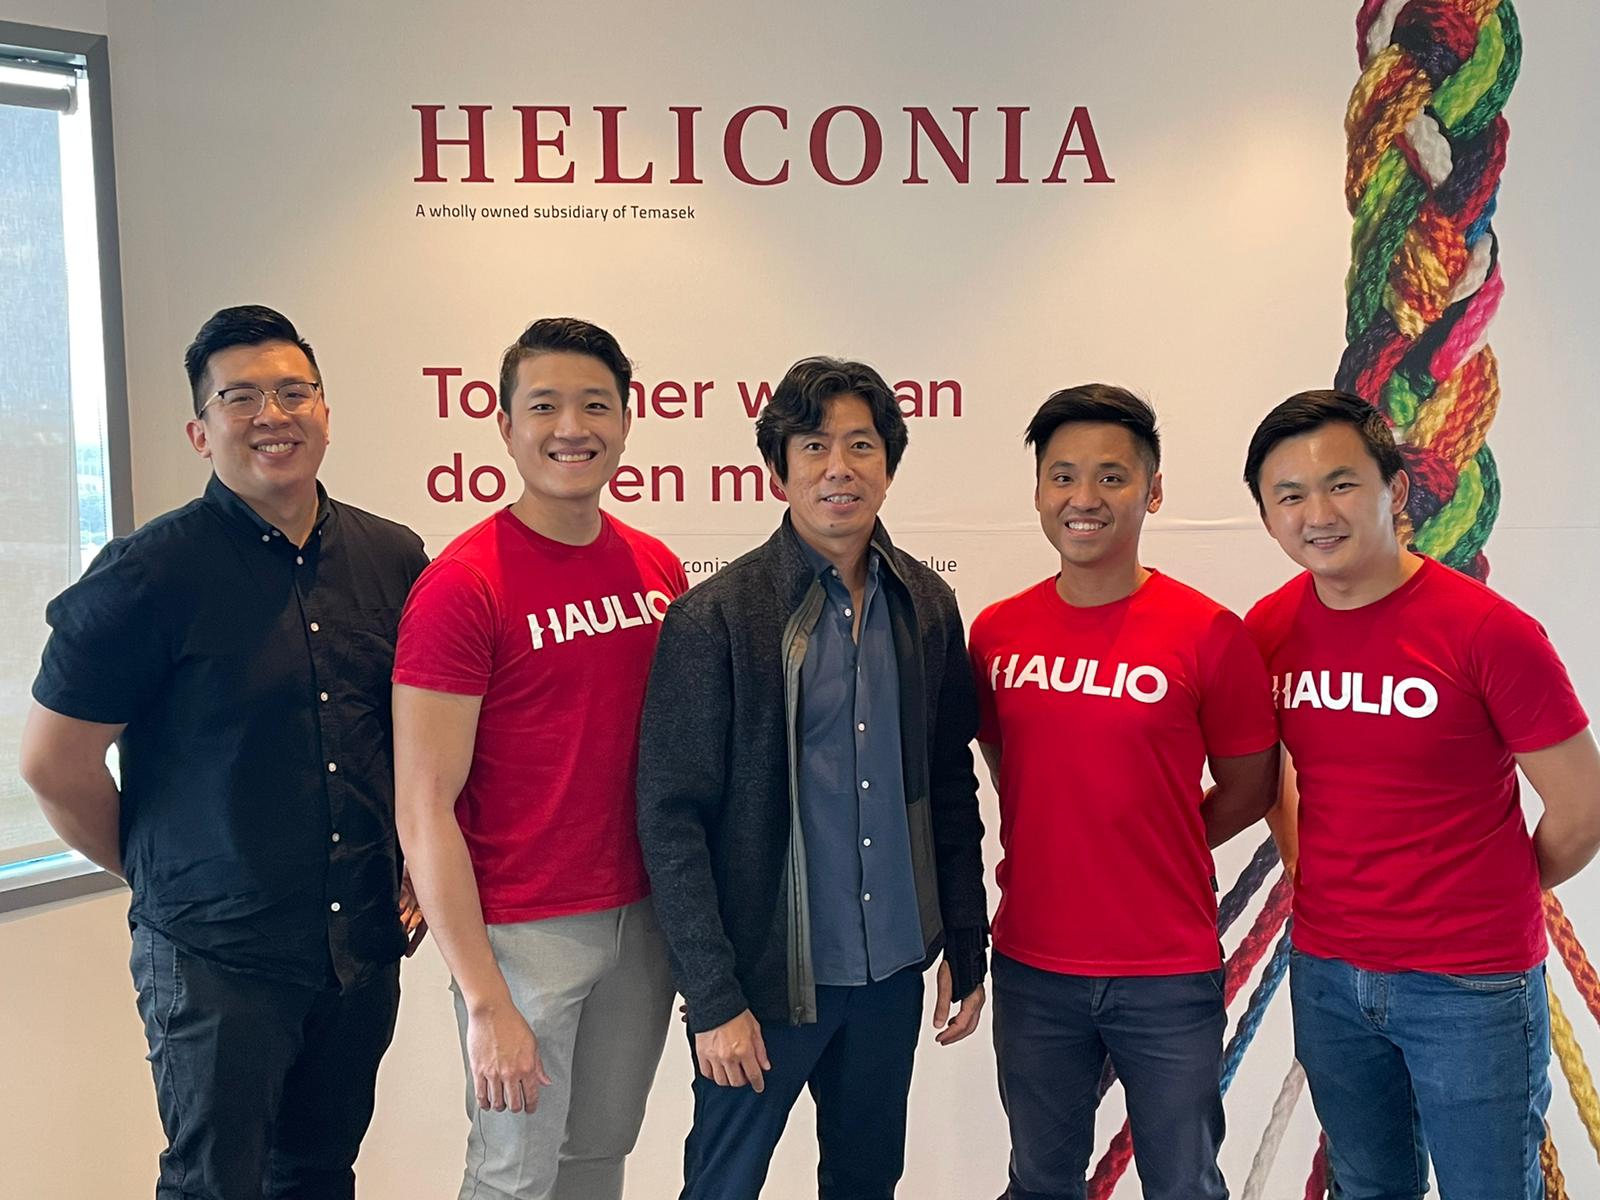 Daily Markup #422: Haulio raises US$7M to fuel regional growth; Glints & Haulio in top 10 fastest-growing companies in Singapore; Parcel Perform grows its team by 150%